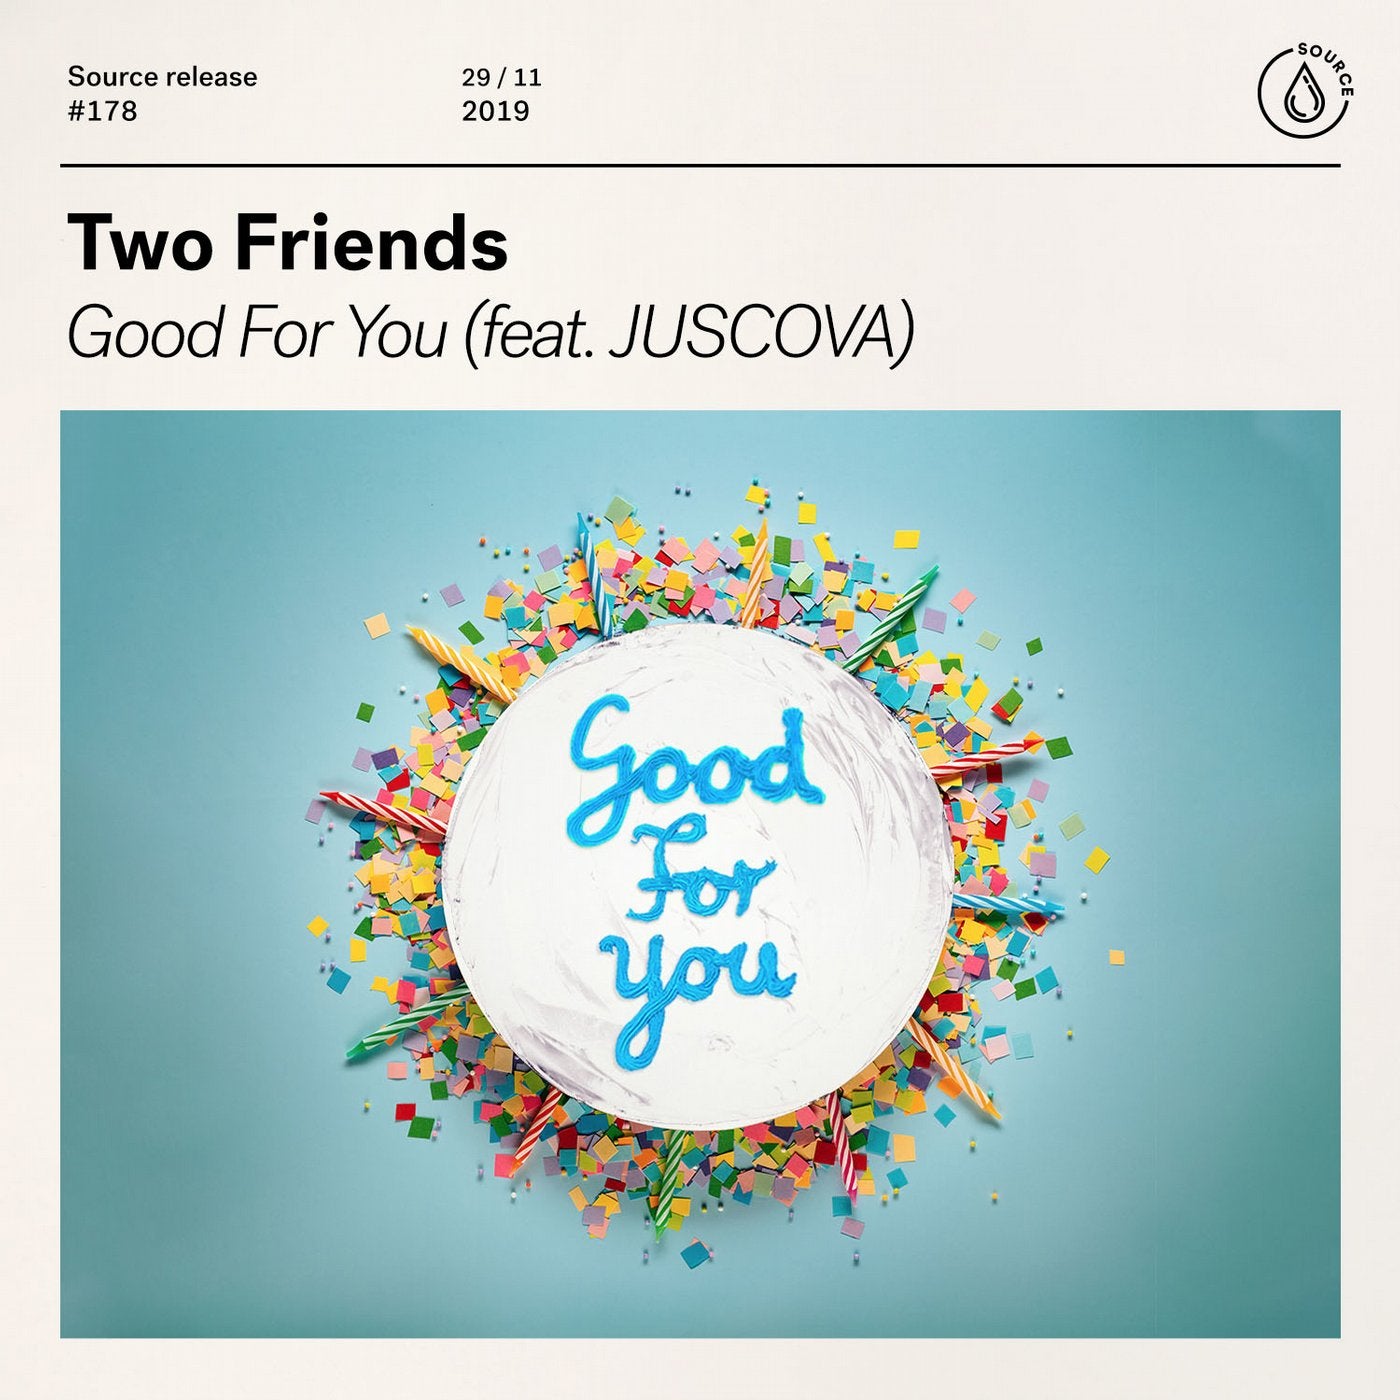 Good For You (feat. JUSCOVA)